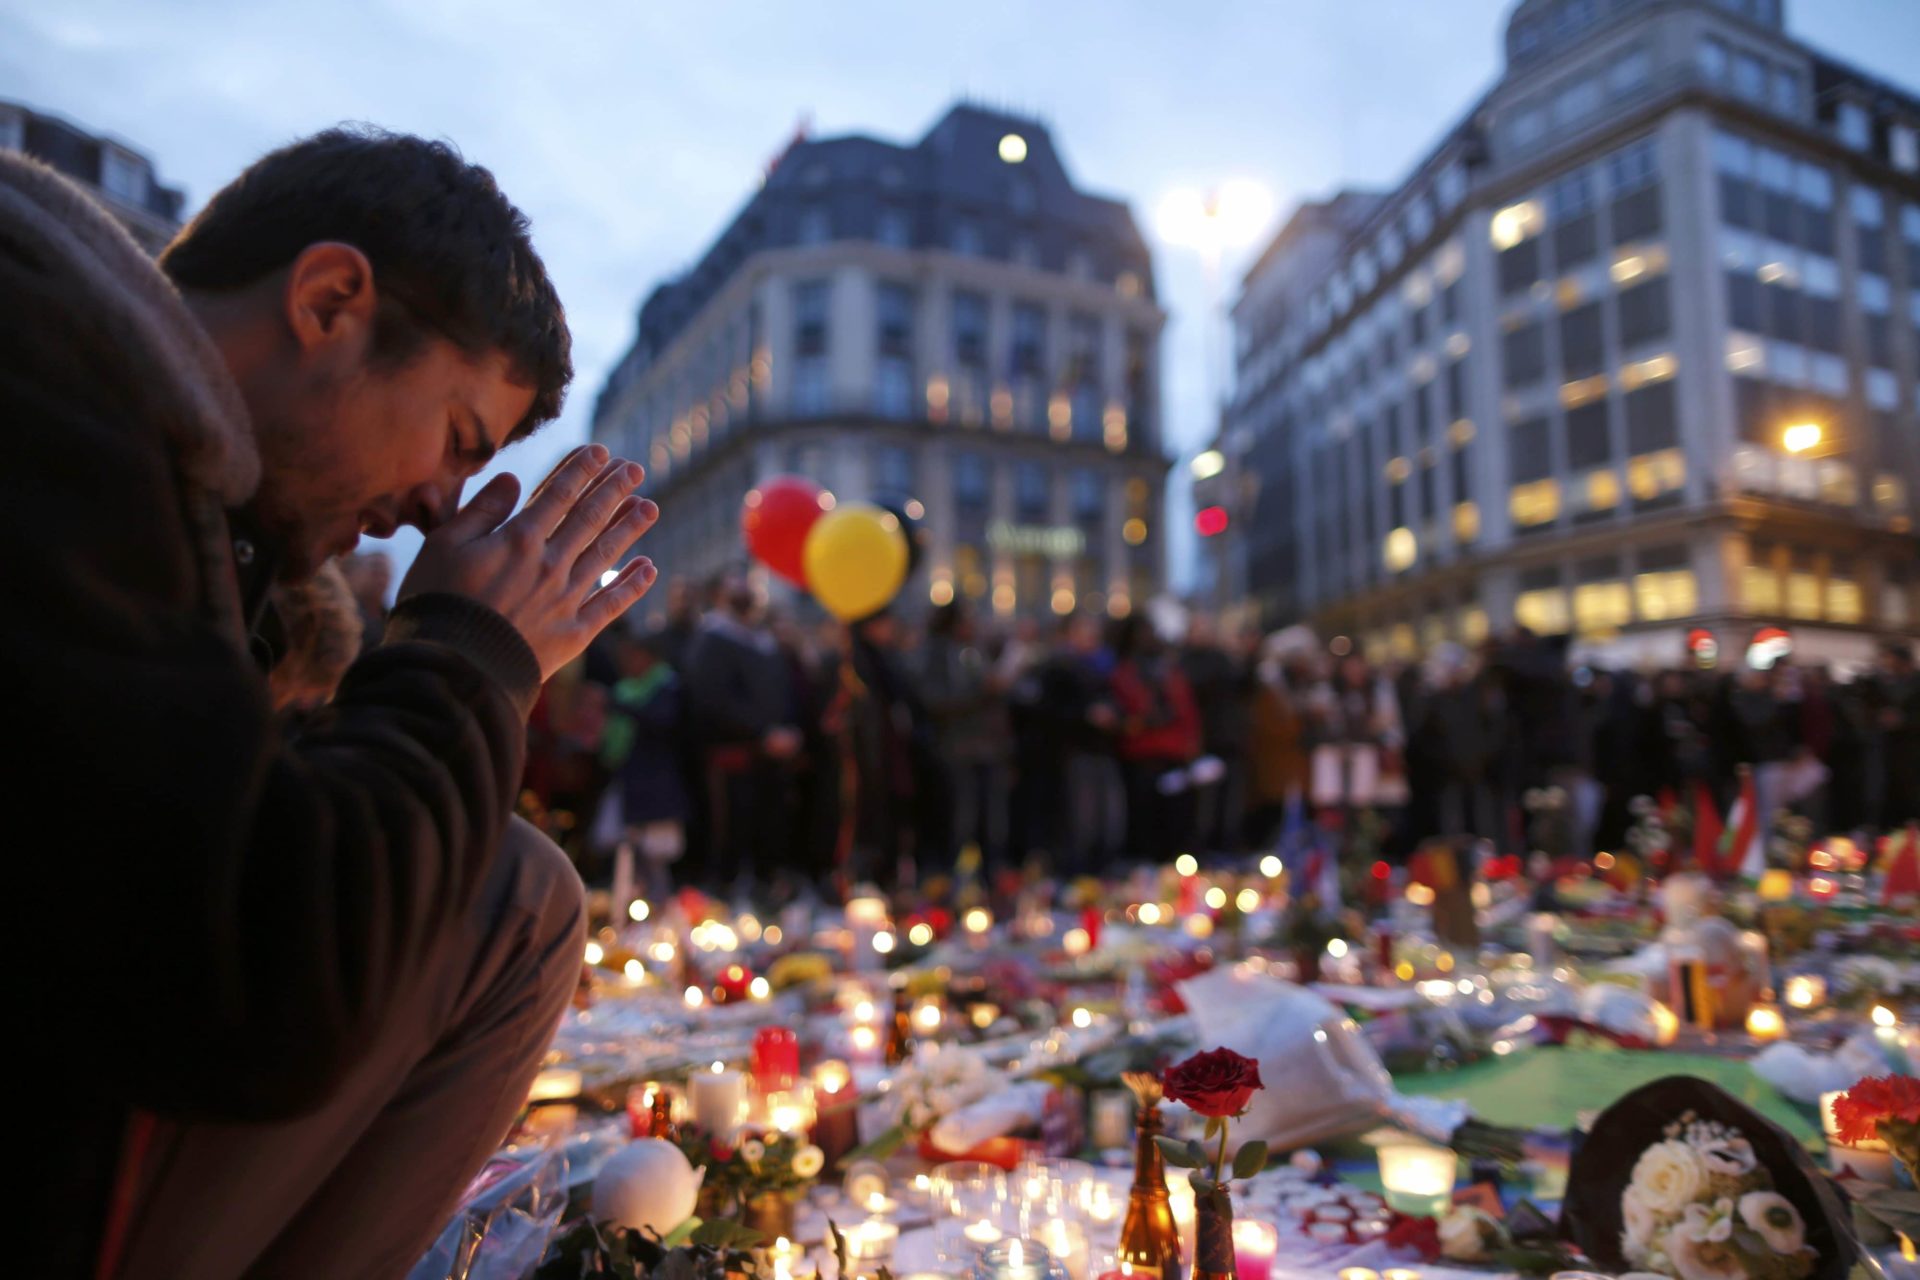 A man prays during a March 23 memorial gathering in Brussels following bomb attacks the previous day. Three nearly simultaneous attacks claimed the lives of dozens and injured more than 200. (CNS photo/Christian Hartmann, Reuters) See BRUSSELS-AIRPORT-CHAPLAIN March 24, 2016.